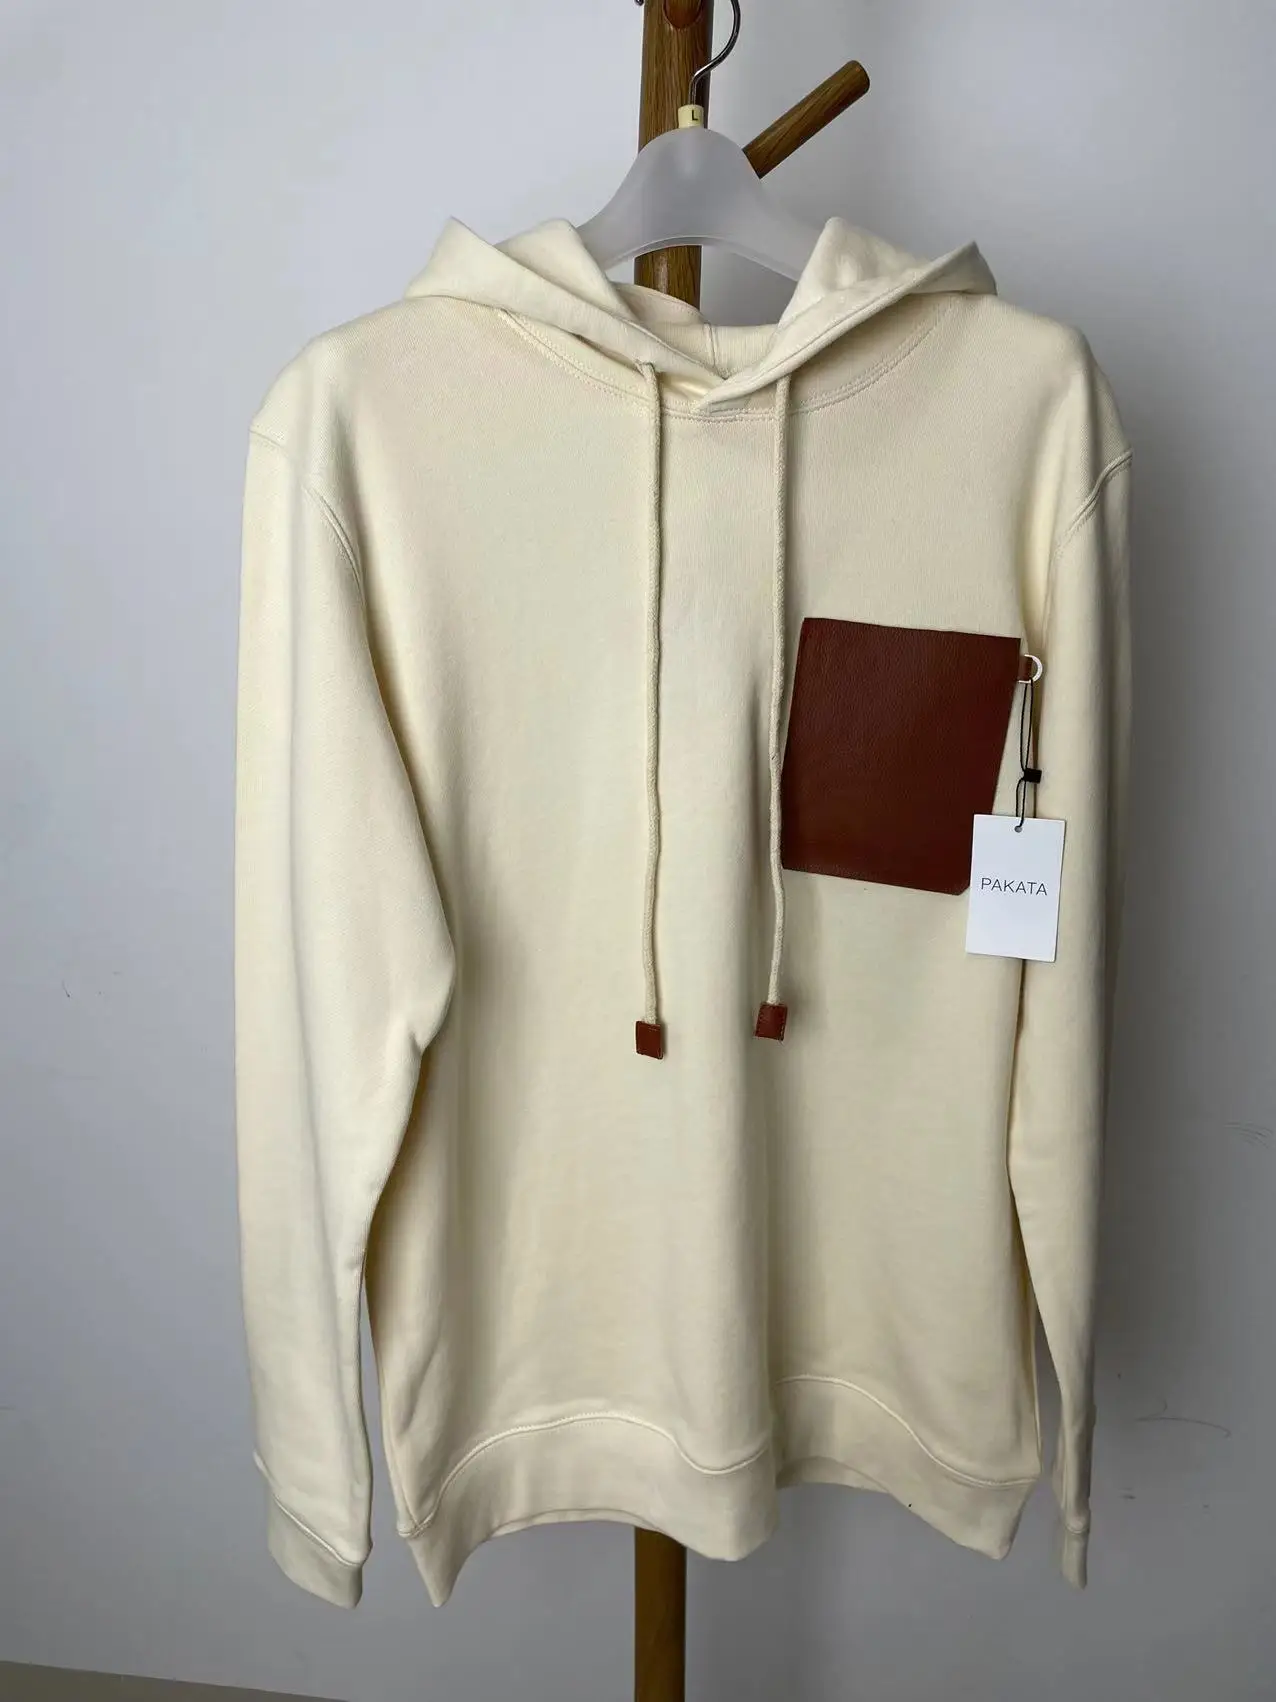 Spring And Autumn Luxury New Leather Label White Letter Hooded Sweatshirts Men And Women With The Same Loose Hoodies